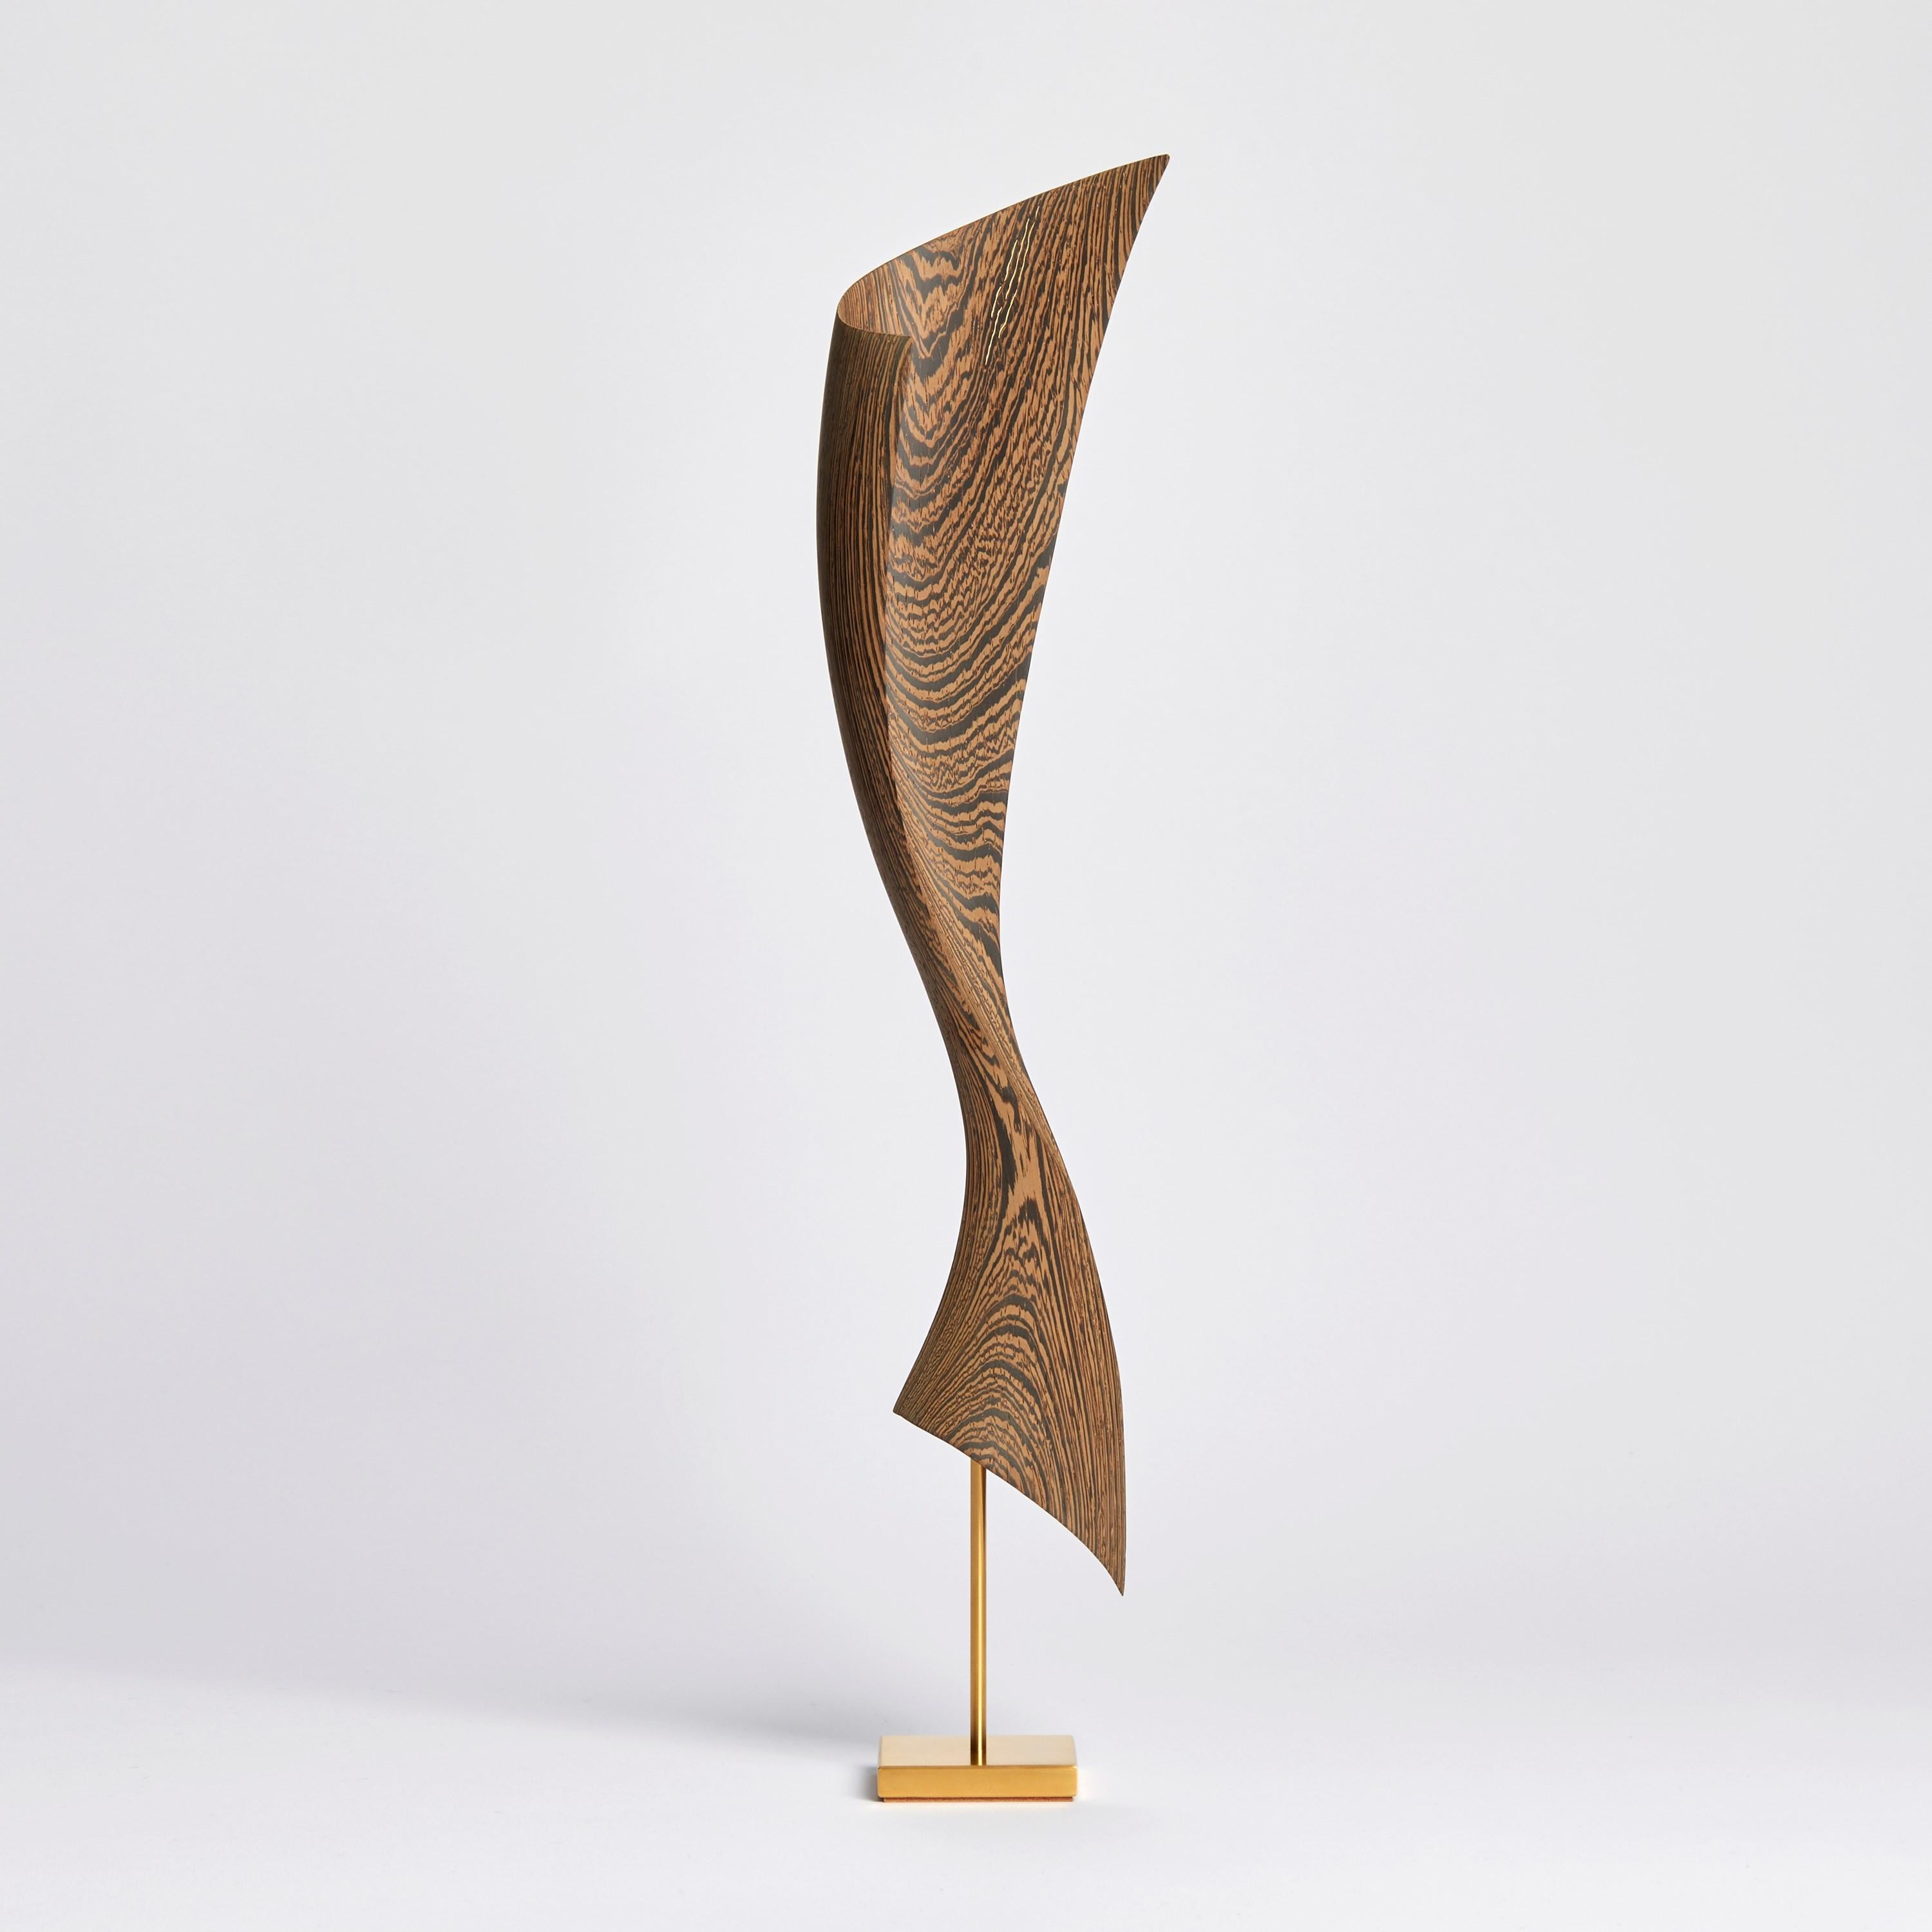 'Flow Petit No 7' is a unique artwork by the Danish artists, Egeværk. It is created from Wengé sourced from Africa - Congo and Cameroon - (wood, FSC* certified) with an inlay of 24ct fine gold and gold plated stainless steel foot. Signed on the